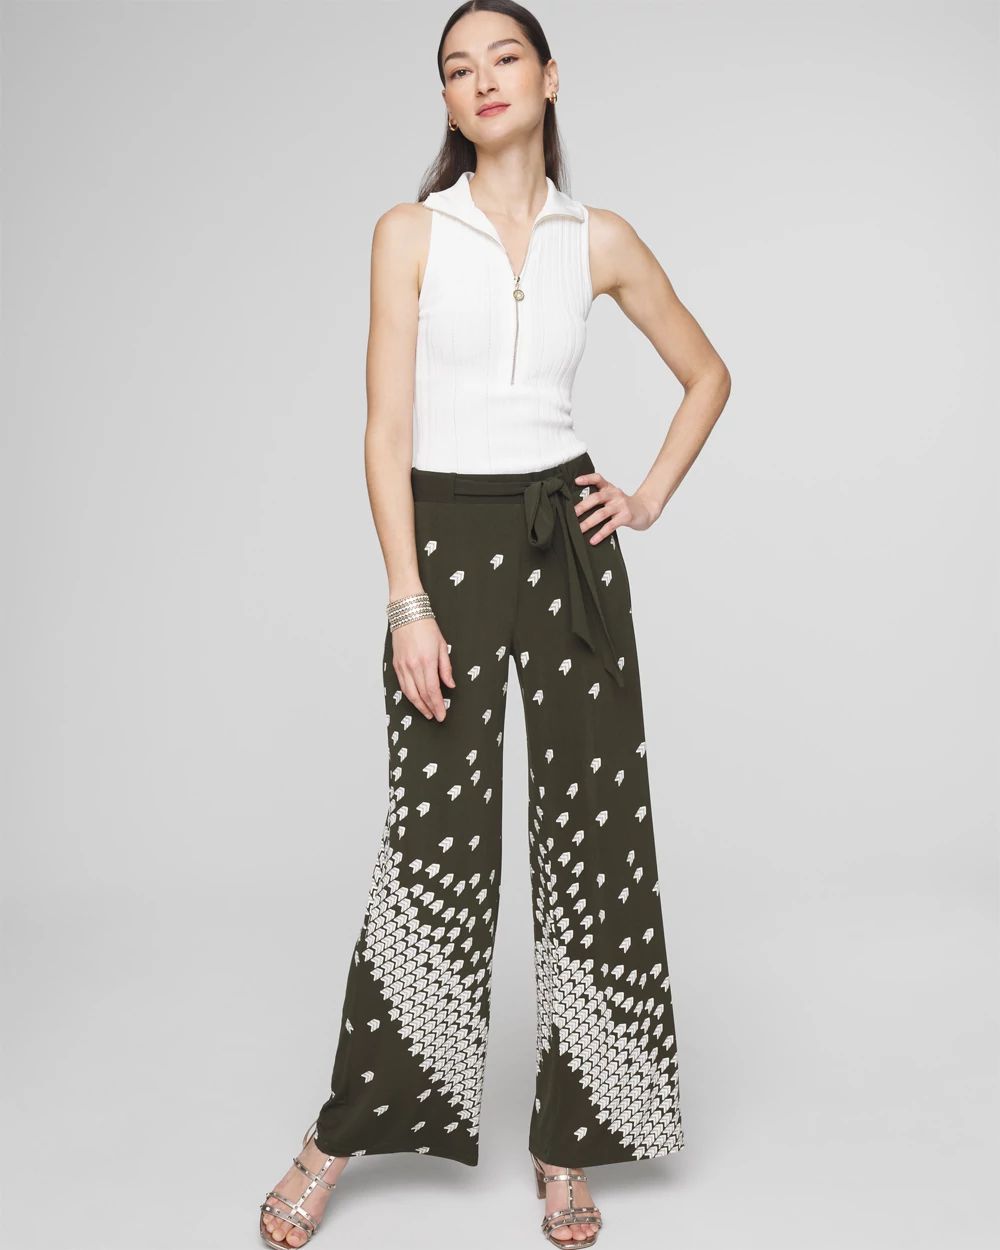 Matte Jersey Wide-Leg Pants click to view larger image.